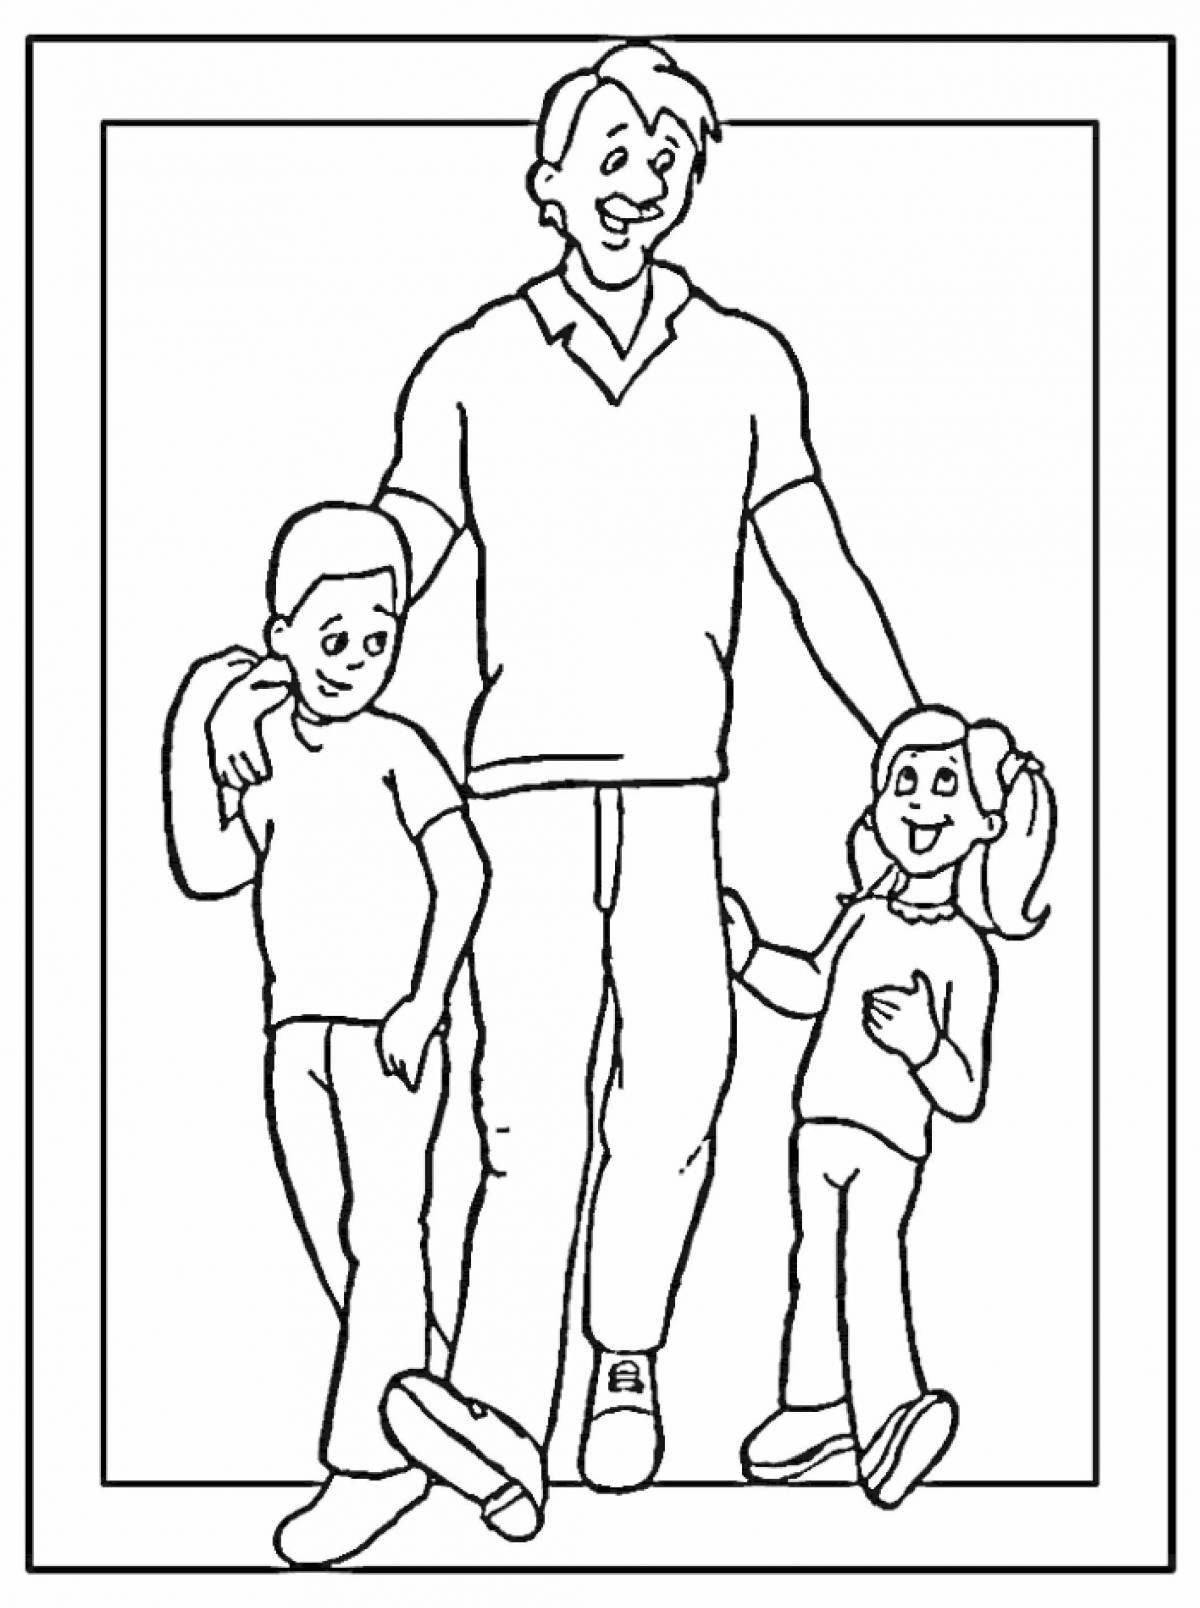 Loving son and dad coloring book